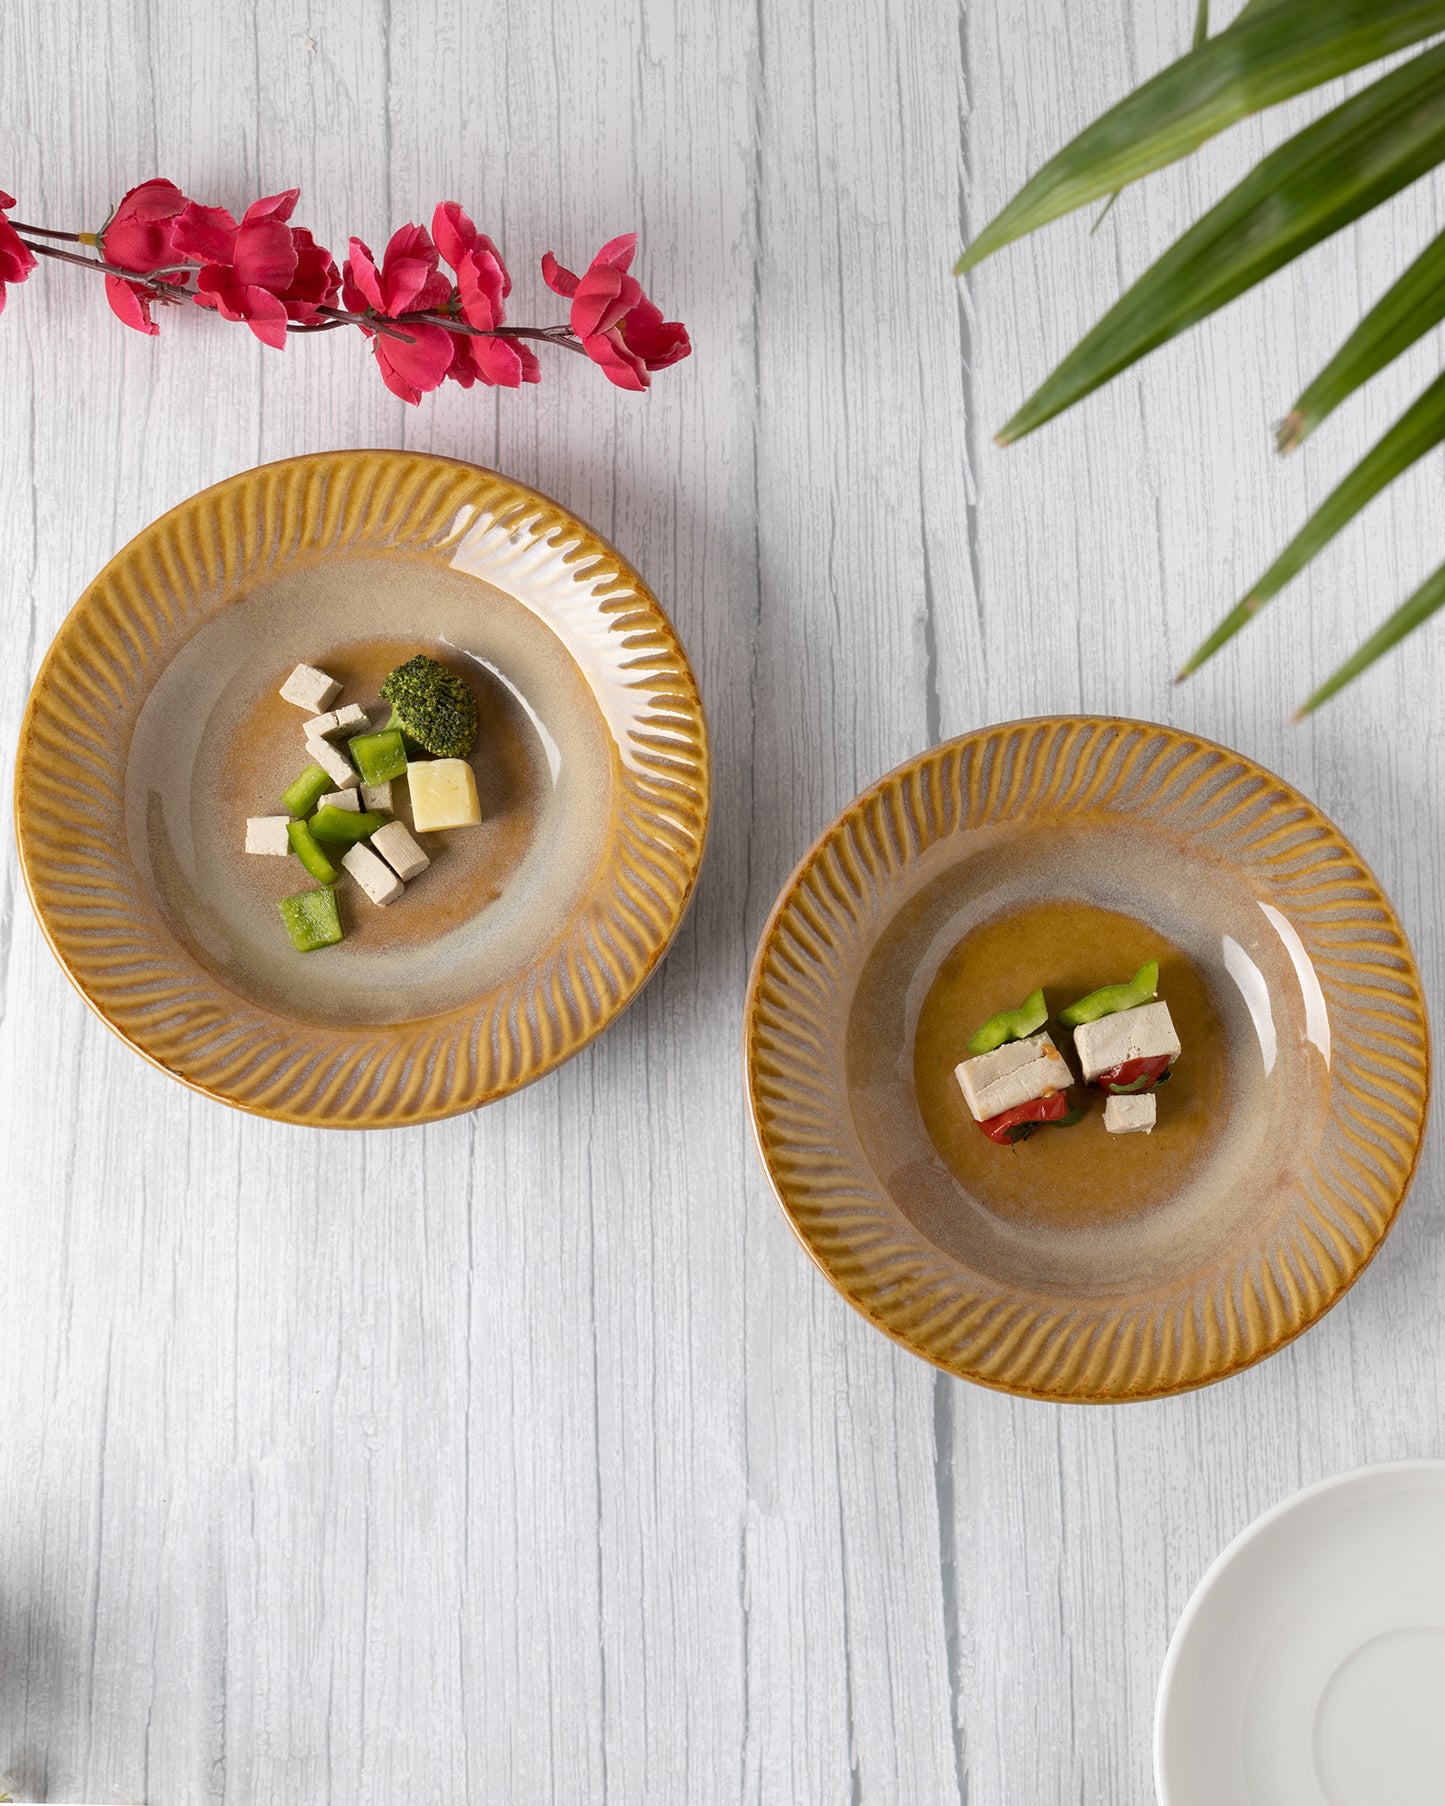 Kitchen Soup Pasta Plate, High Quality Stoneware Serving Platter | Dishwasher & Microwave Safe, set of 2, Small Mustard Yellow